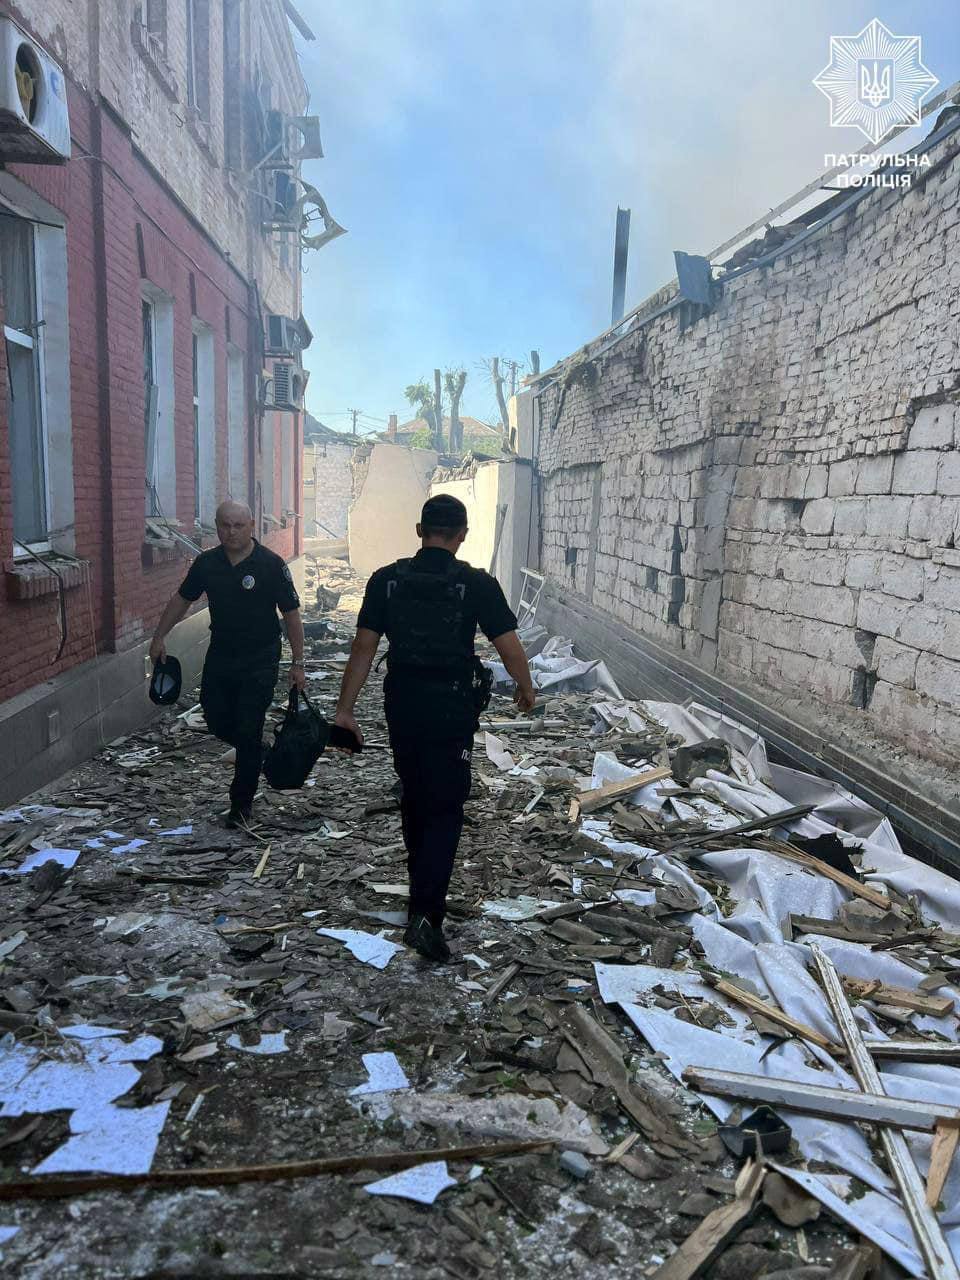 The police administrative building in Kryvyi Rih was hit: one person killed, 59 injured. Photo